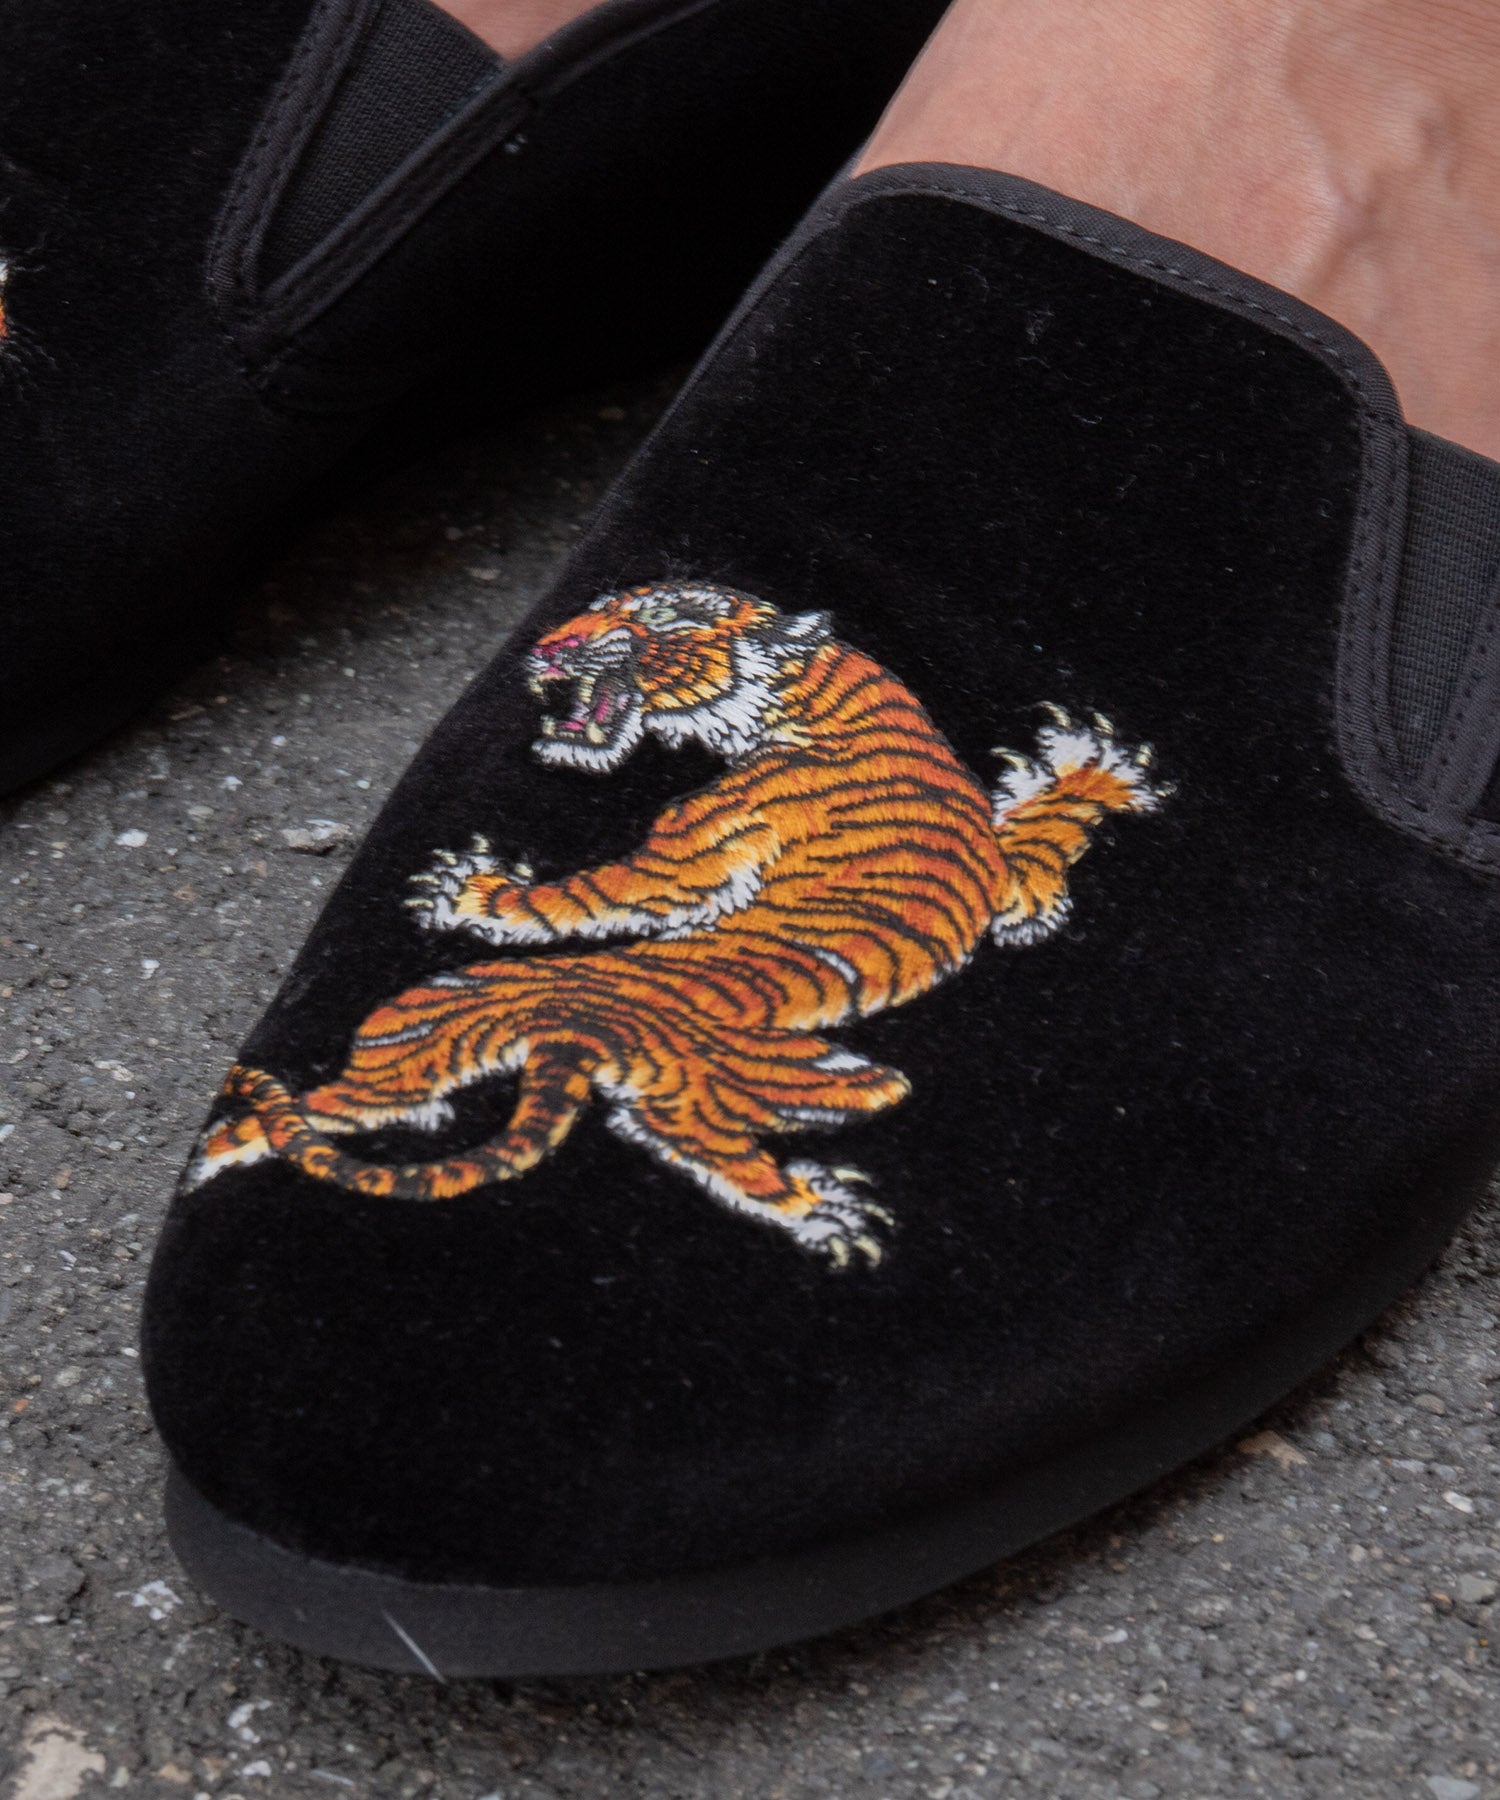 KUNG-FU SHOES